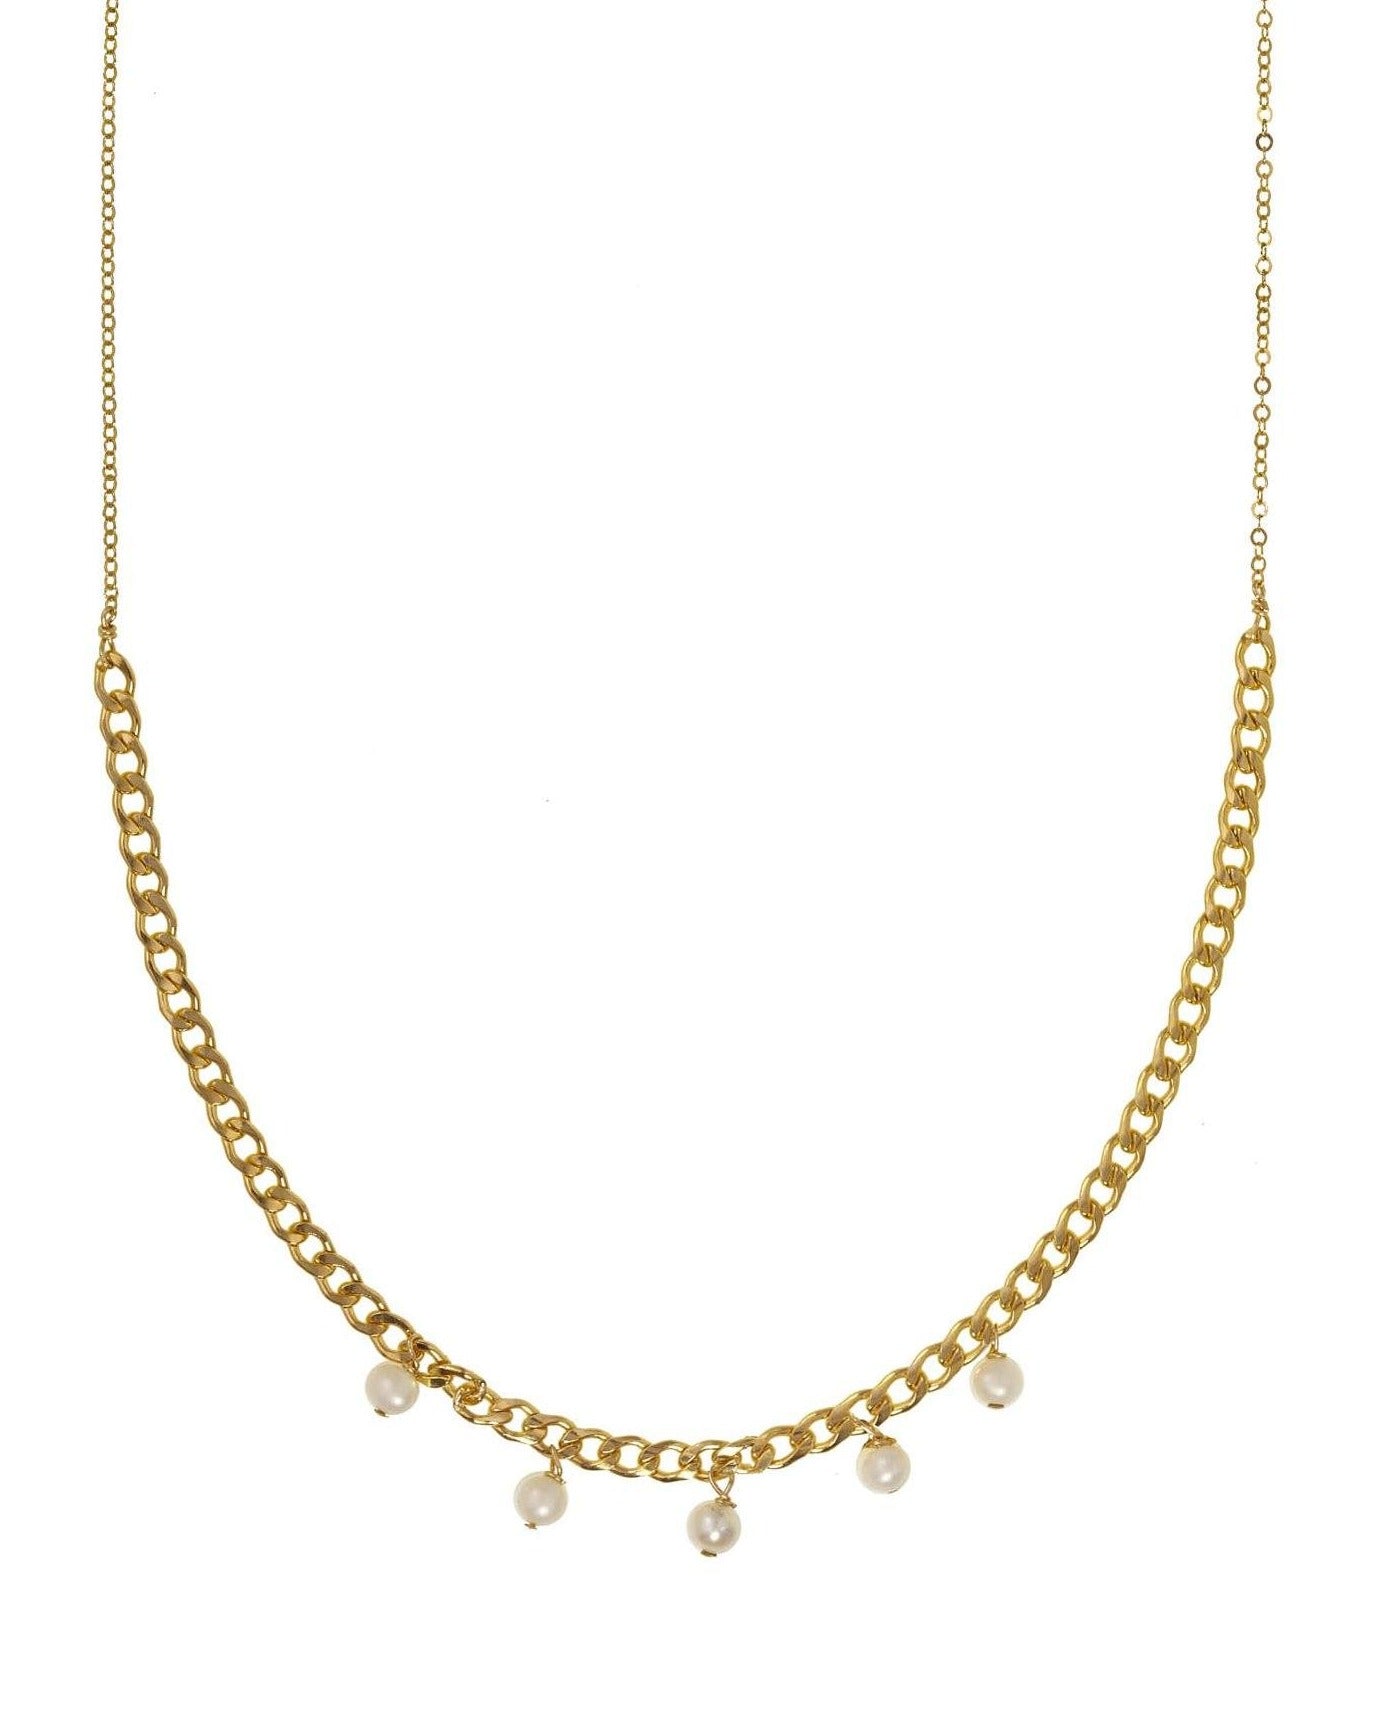 Sofia Necklace by KOZAKH. A 16 to 18 inch adjustable length necklace, crafted in 14K Gold Filled, featuring a lower half of 5mm Flat curb chain and 4mm white pearls.